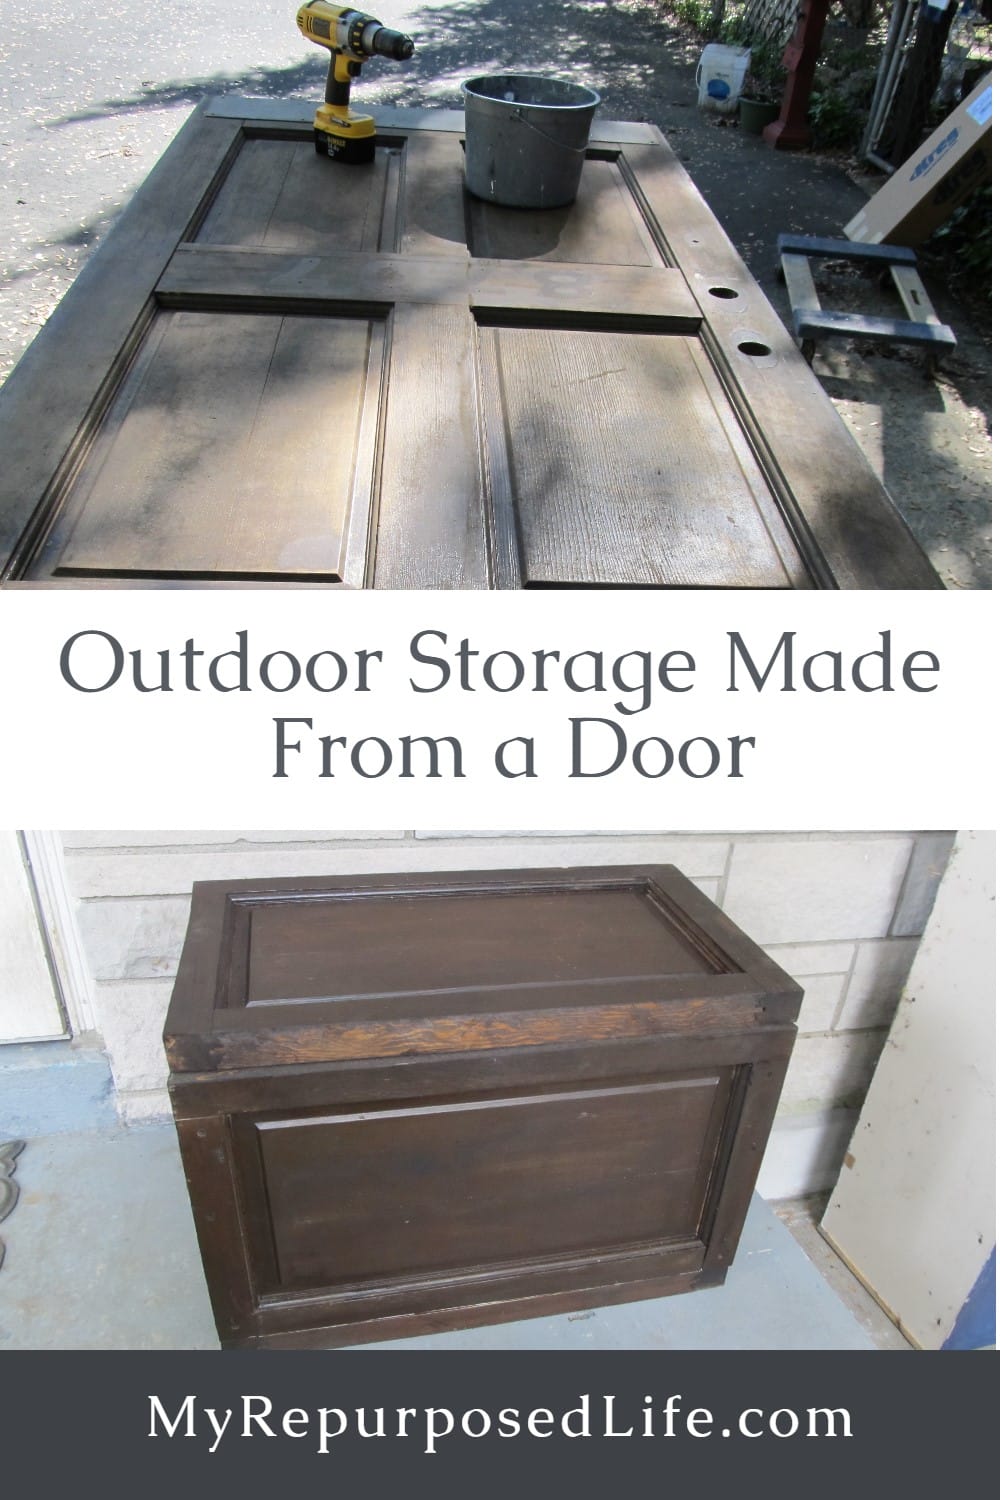 This trunk made from a door project wasn't easy, but it's sturdy and will last a long, long time. Having the proper tools make this project go more smoothly. #MyRepurposedLife #outdoor #storage via @repurposedlife